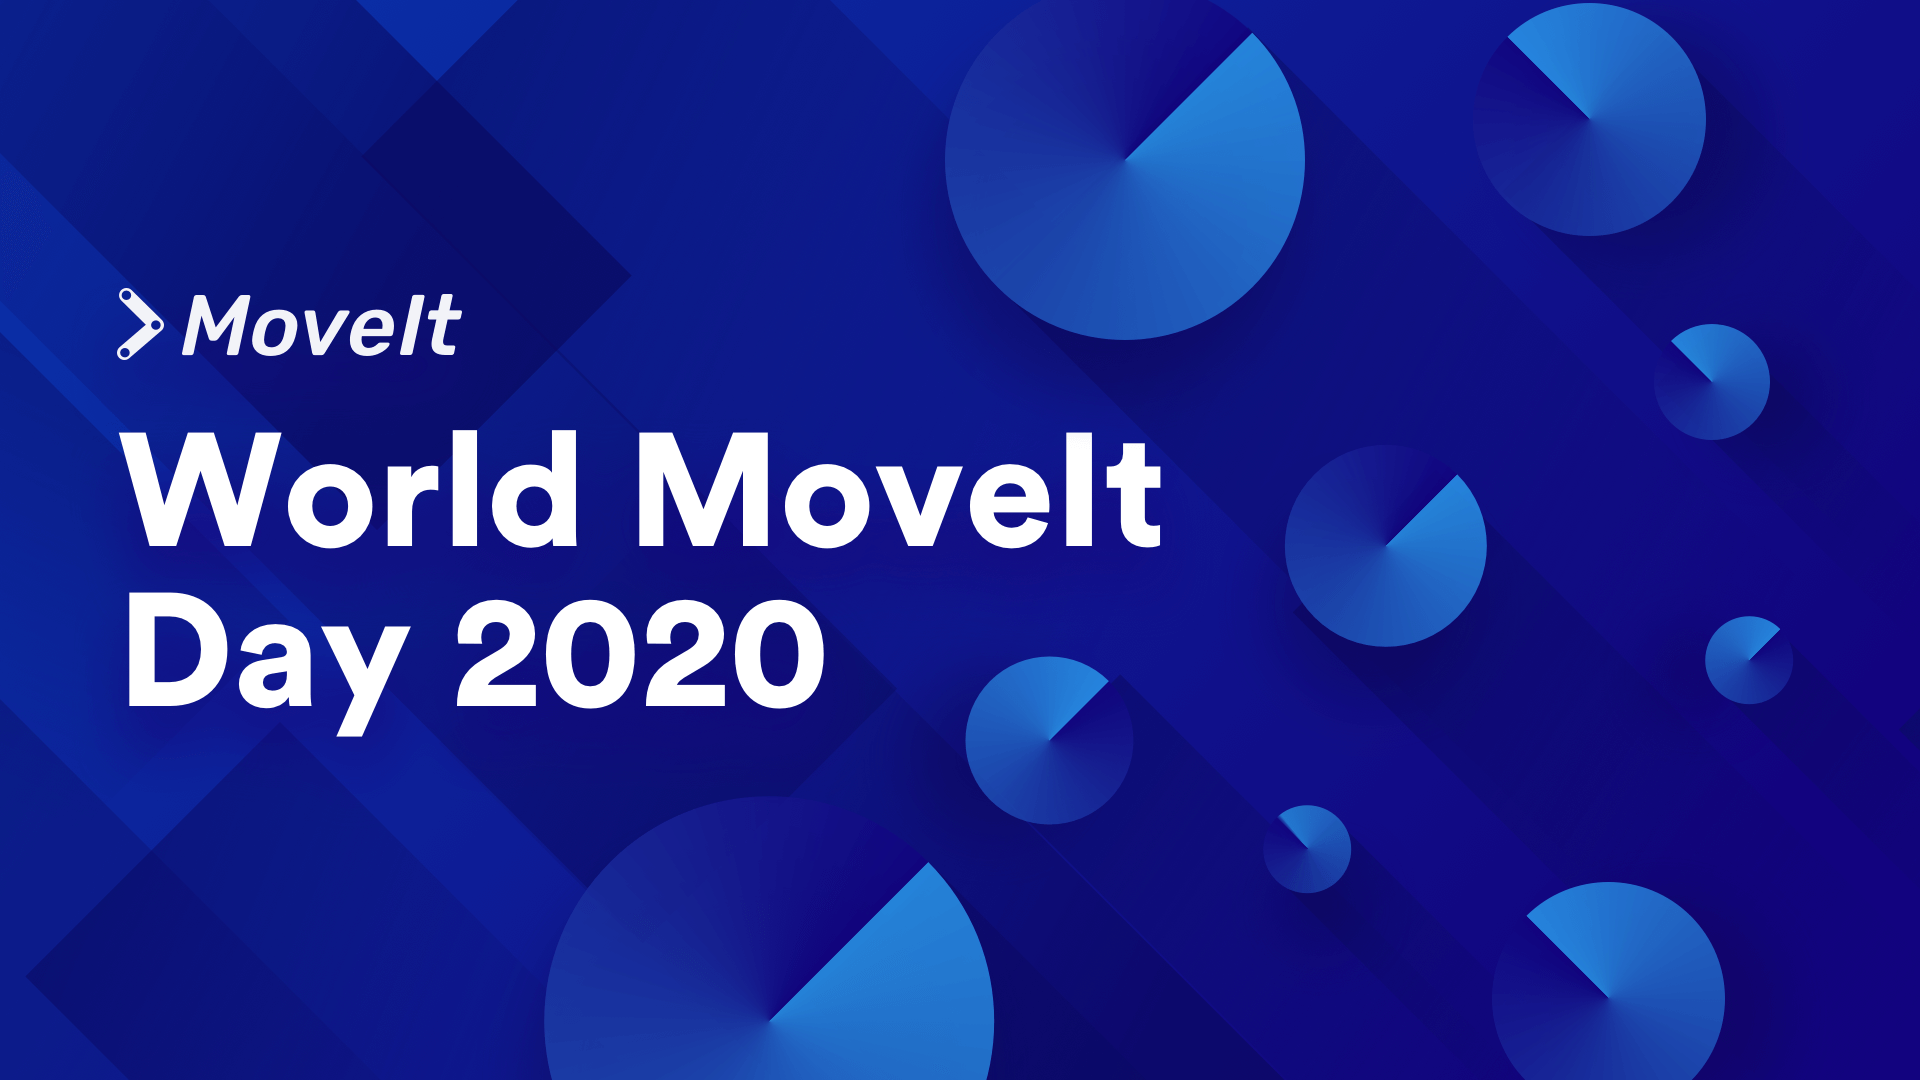 Join us for World MoveIt Day 2020!